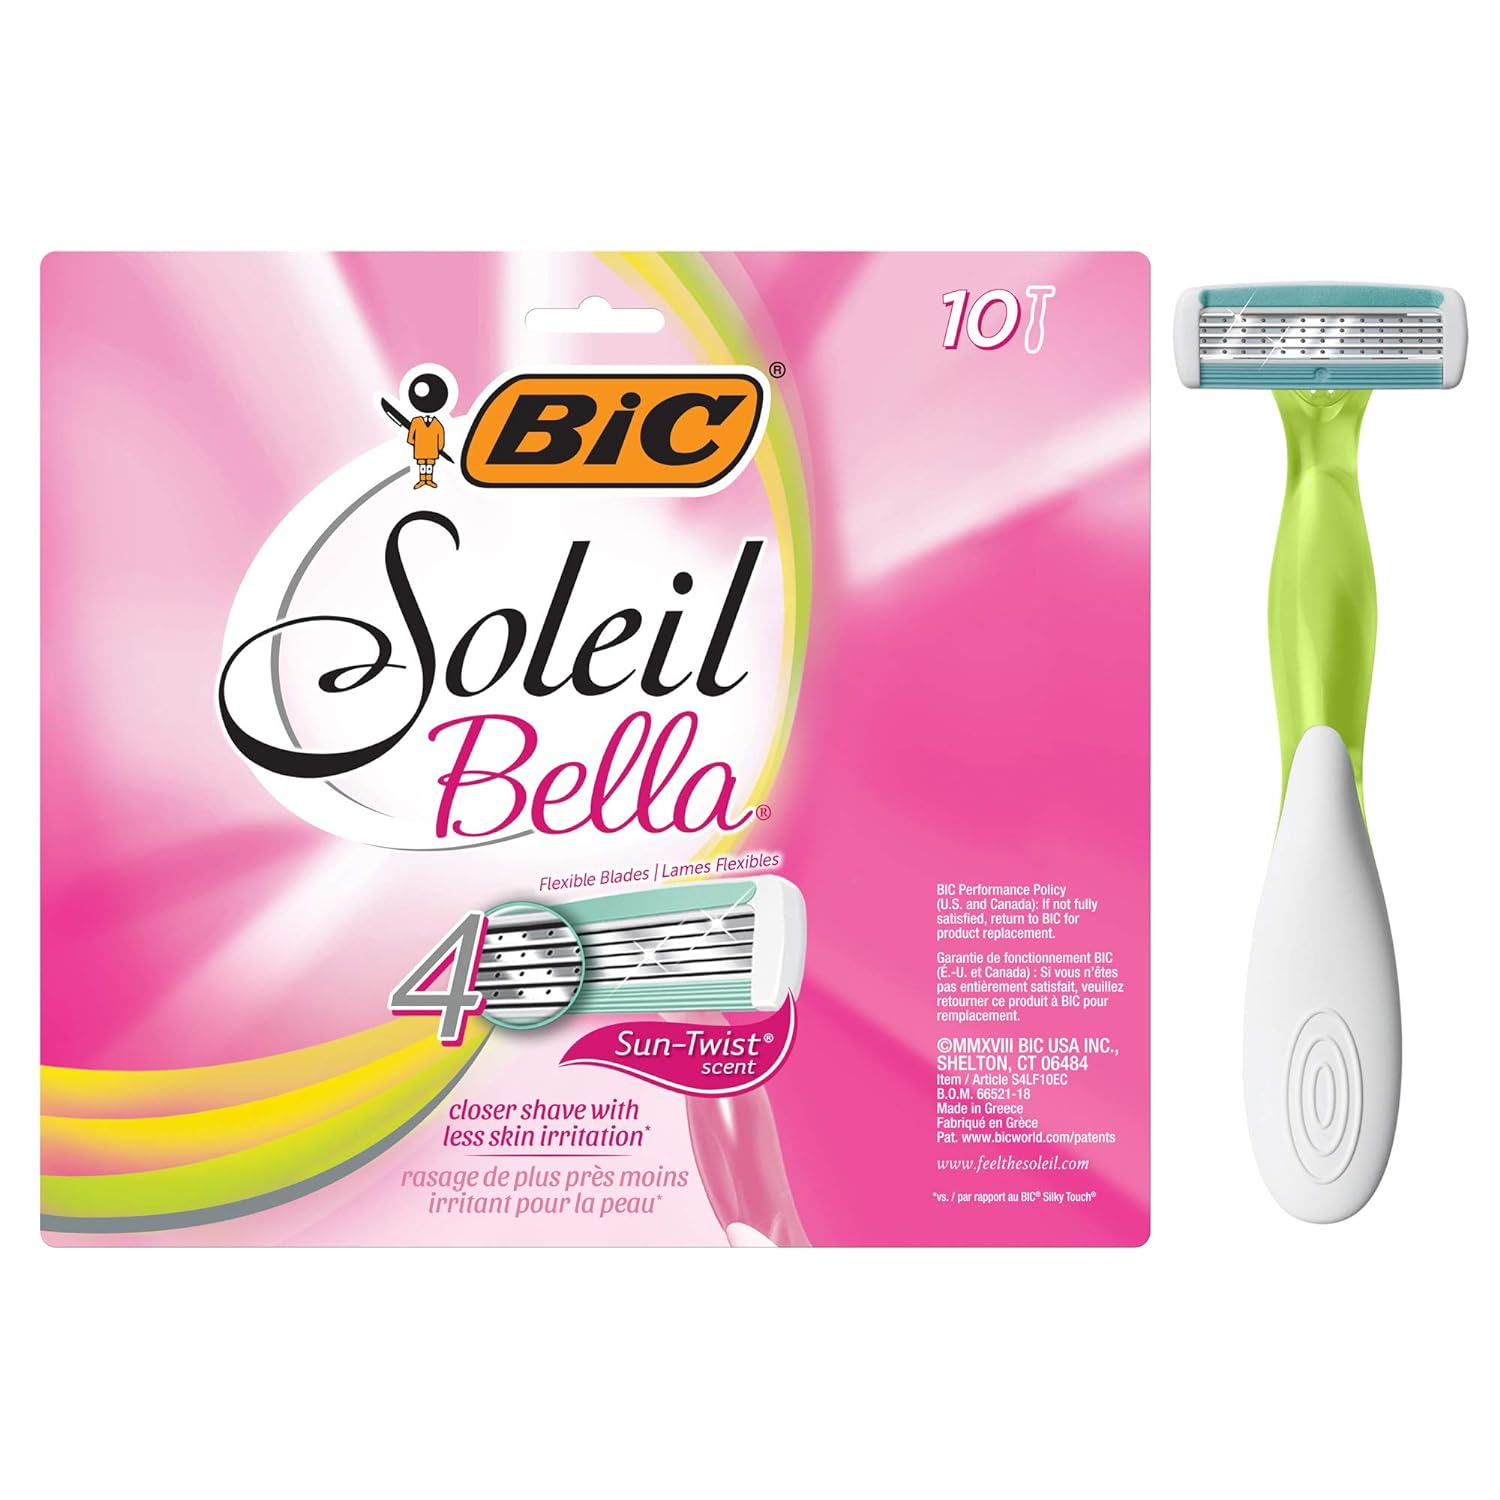 BIC Soleil Escape Women' Disposable Razors With 4 Blades for a Sensorial Experience and Comfortable Shave, Pack of Citrus Scented Handle Shaving Razors for Women, 10 Count